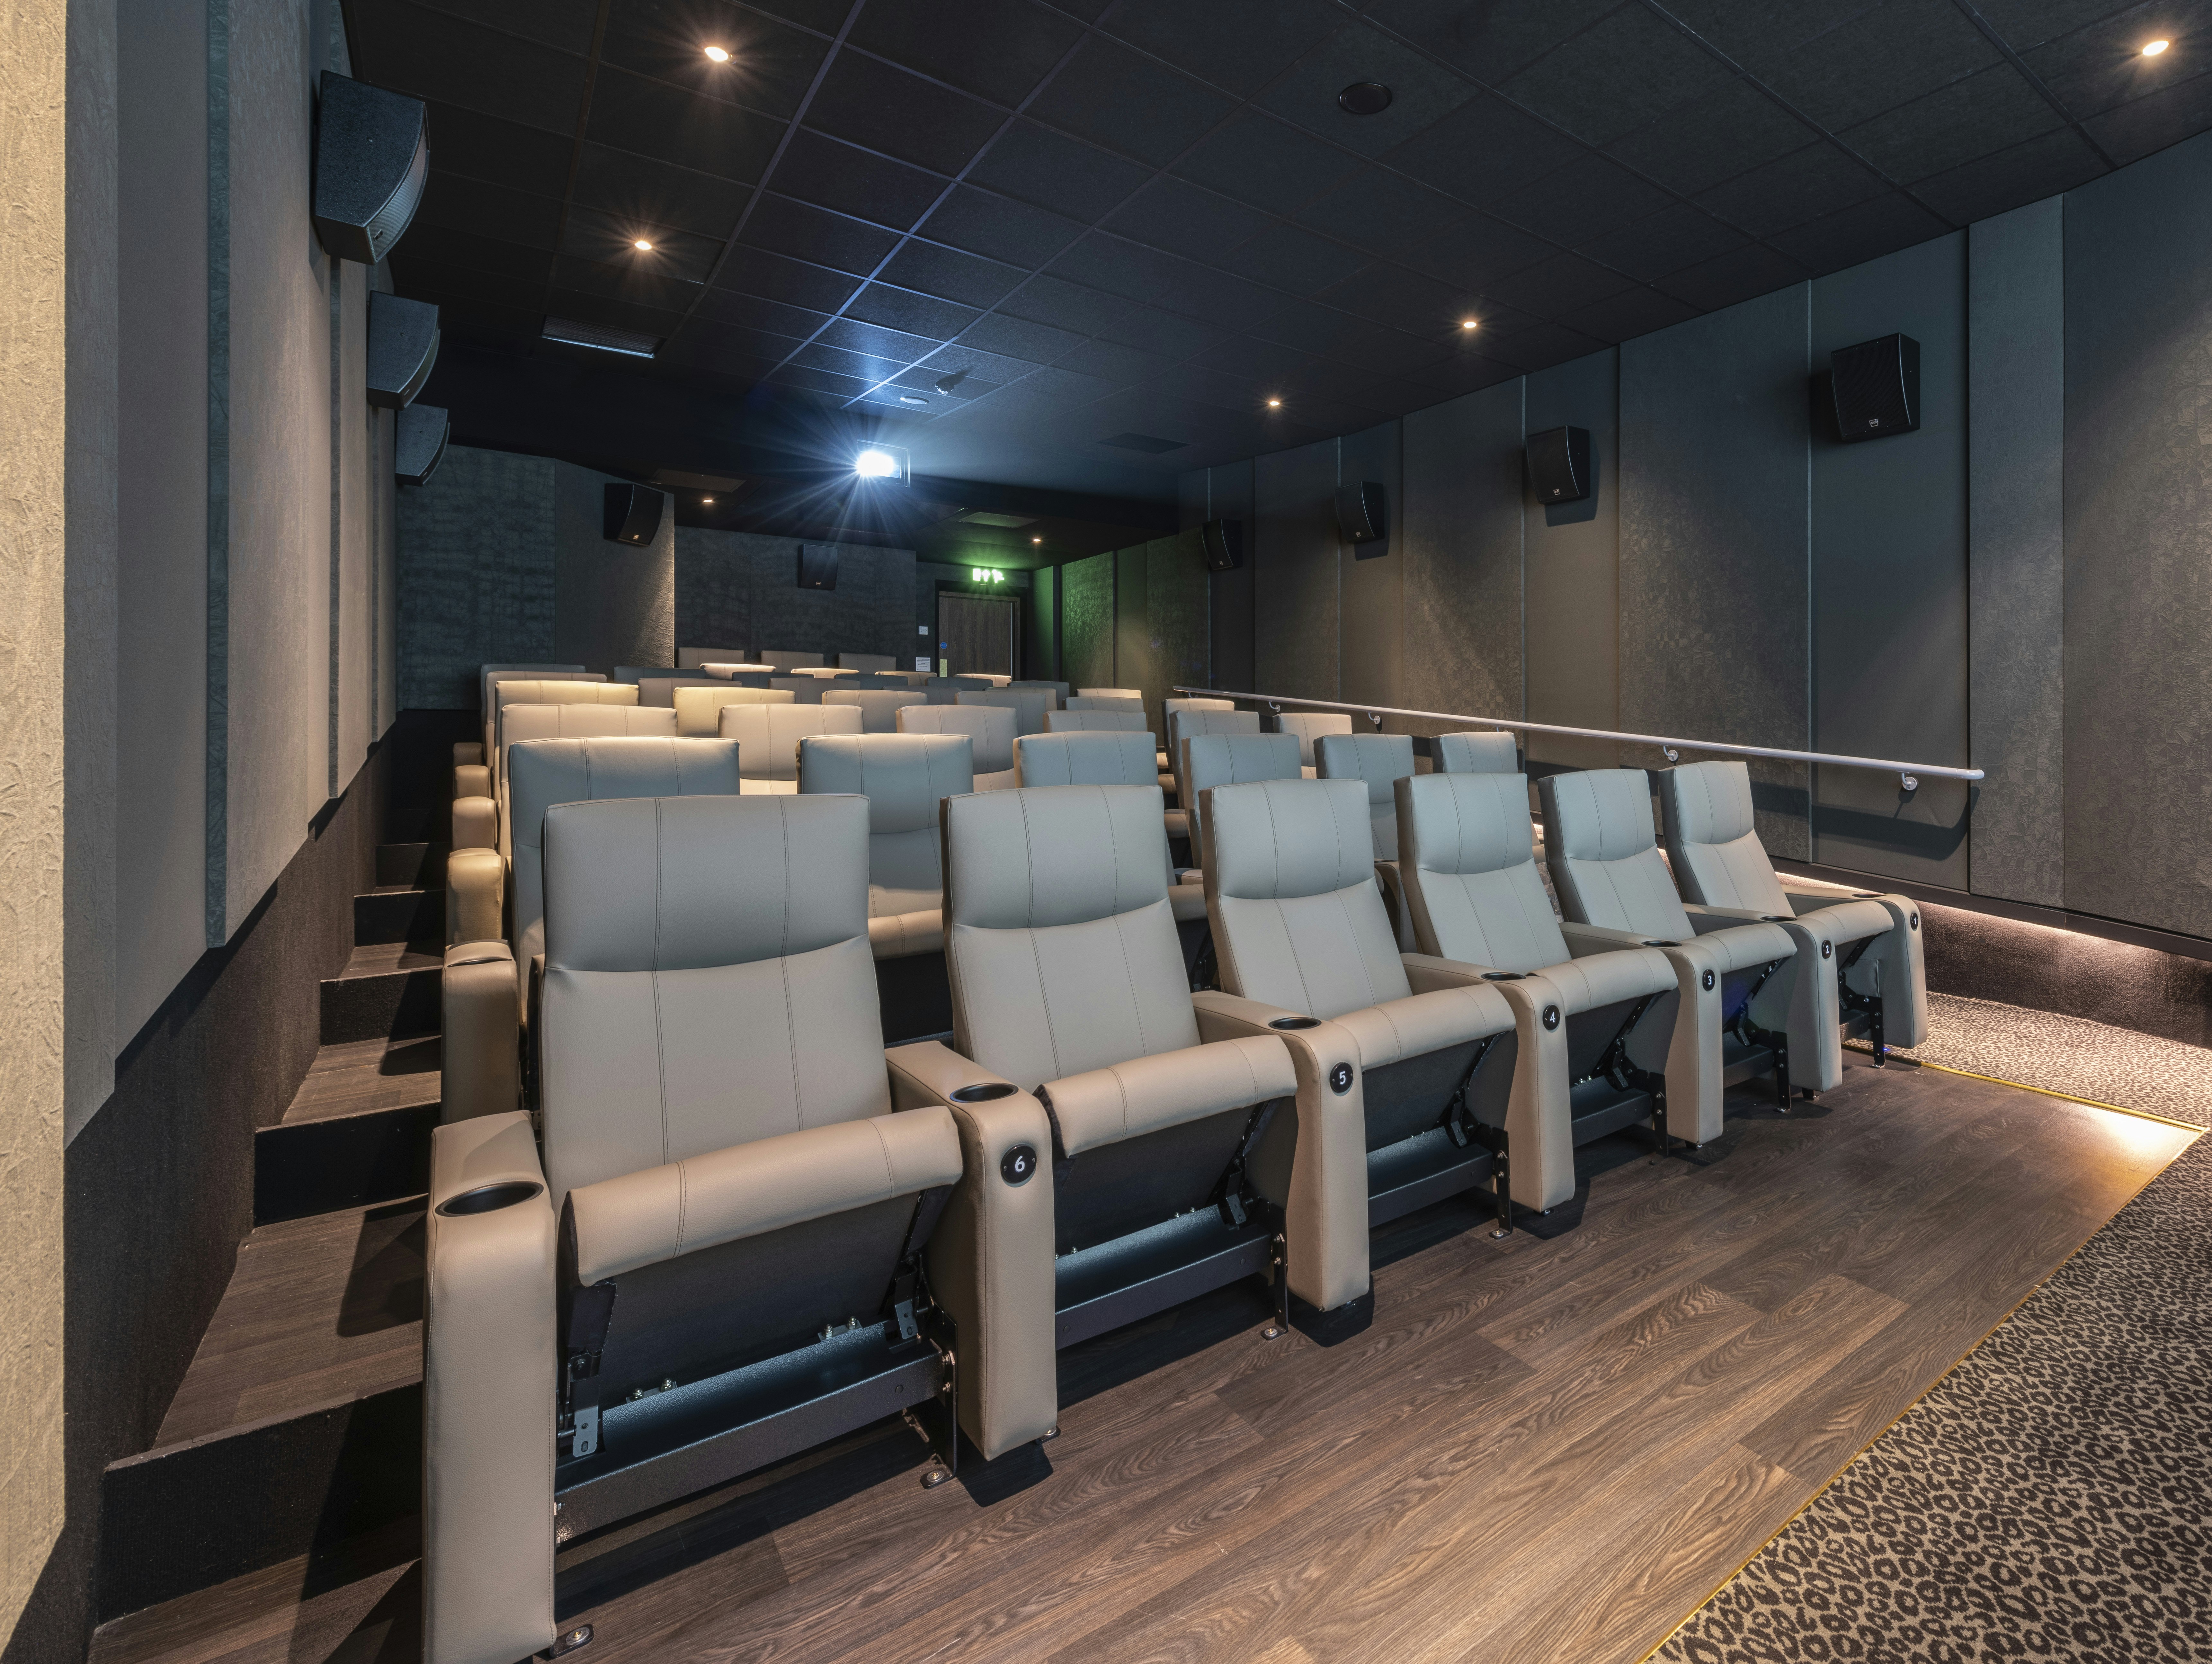 ODEON LUXE Leicester Square   - Studio Screens image 2